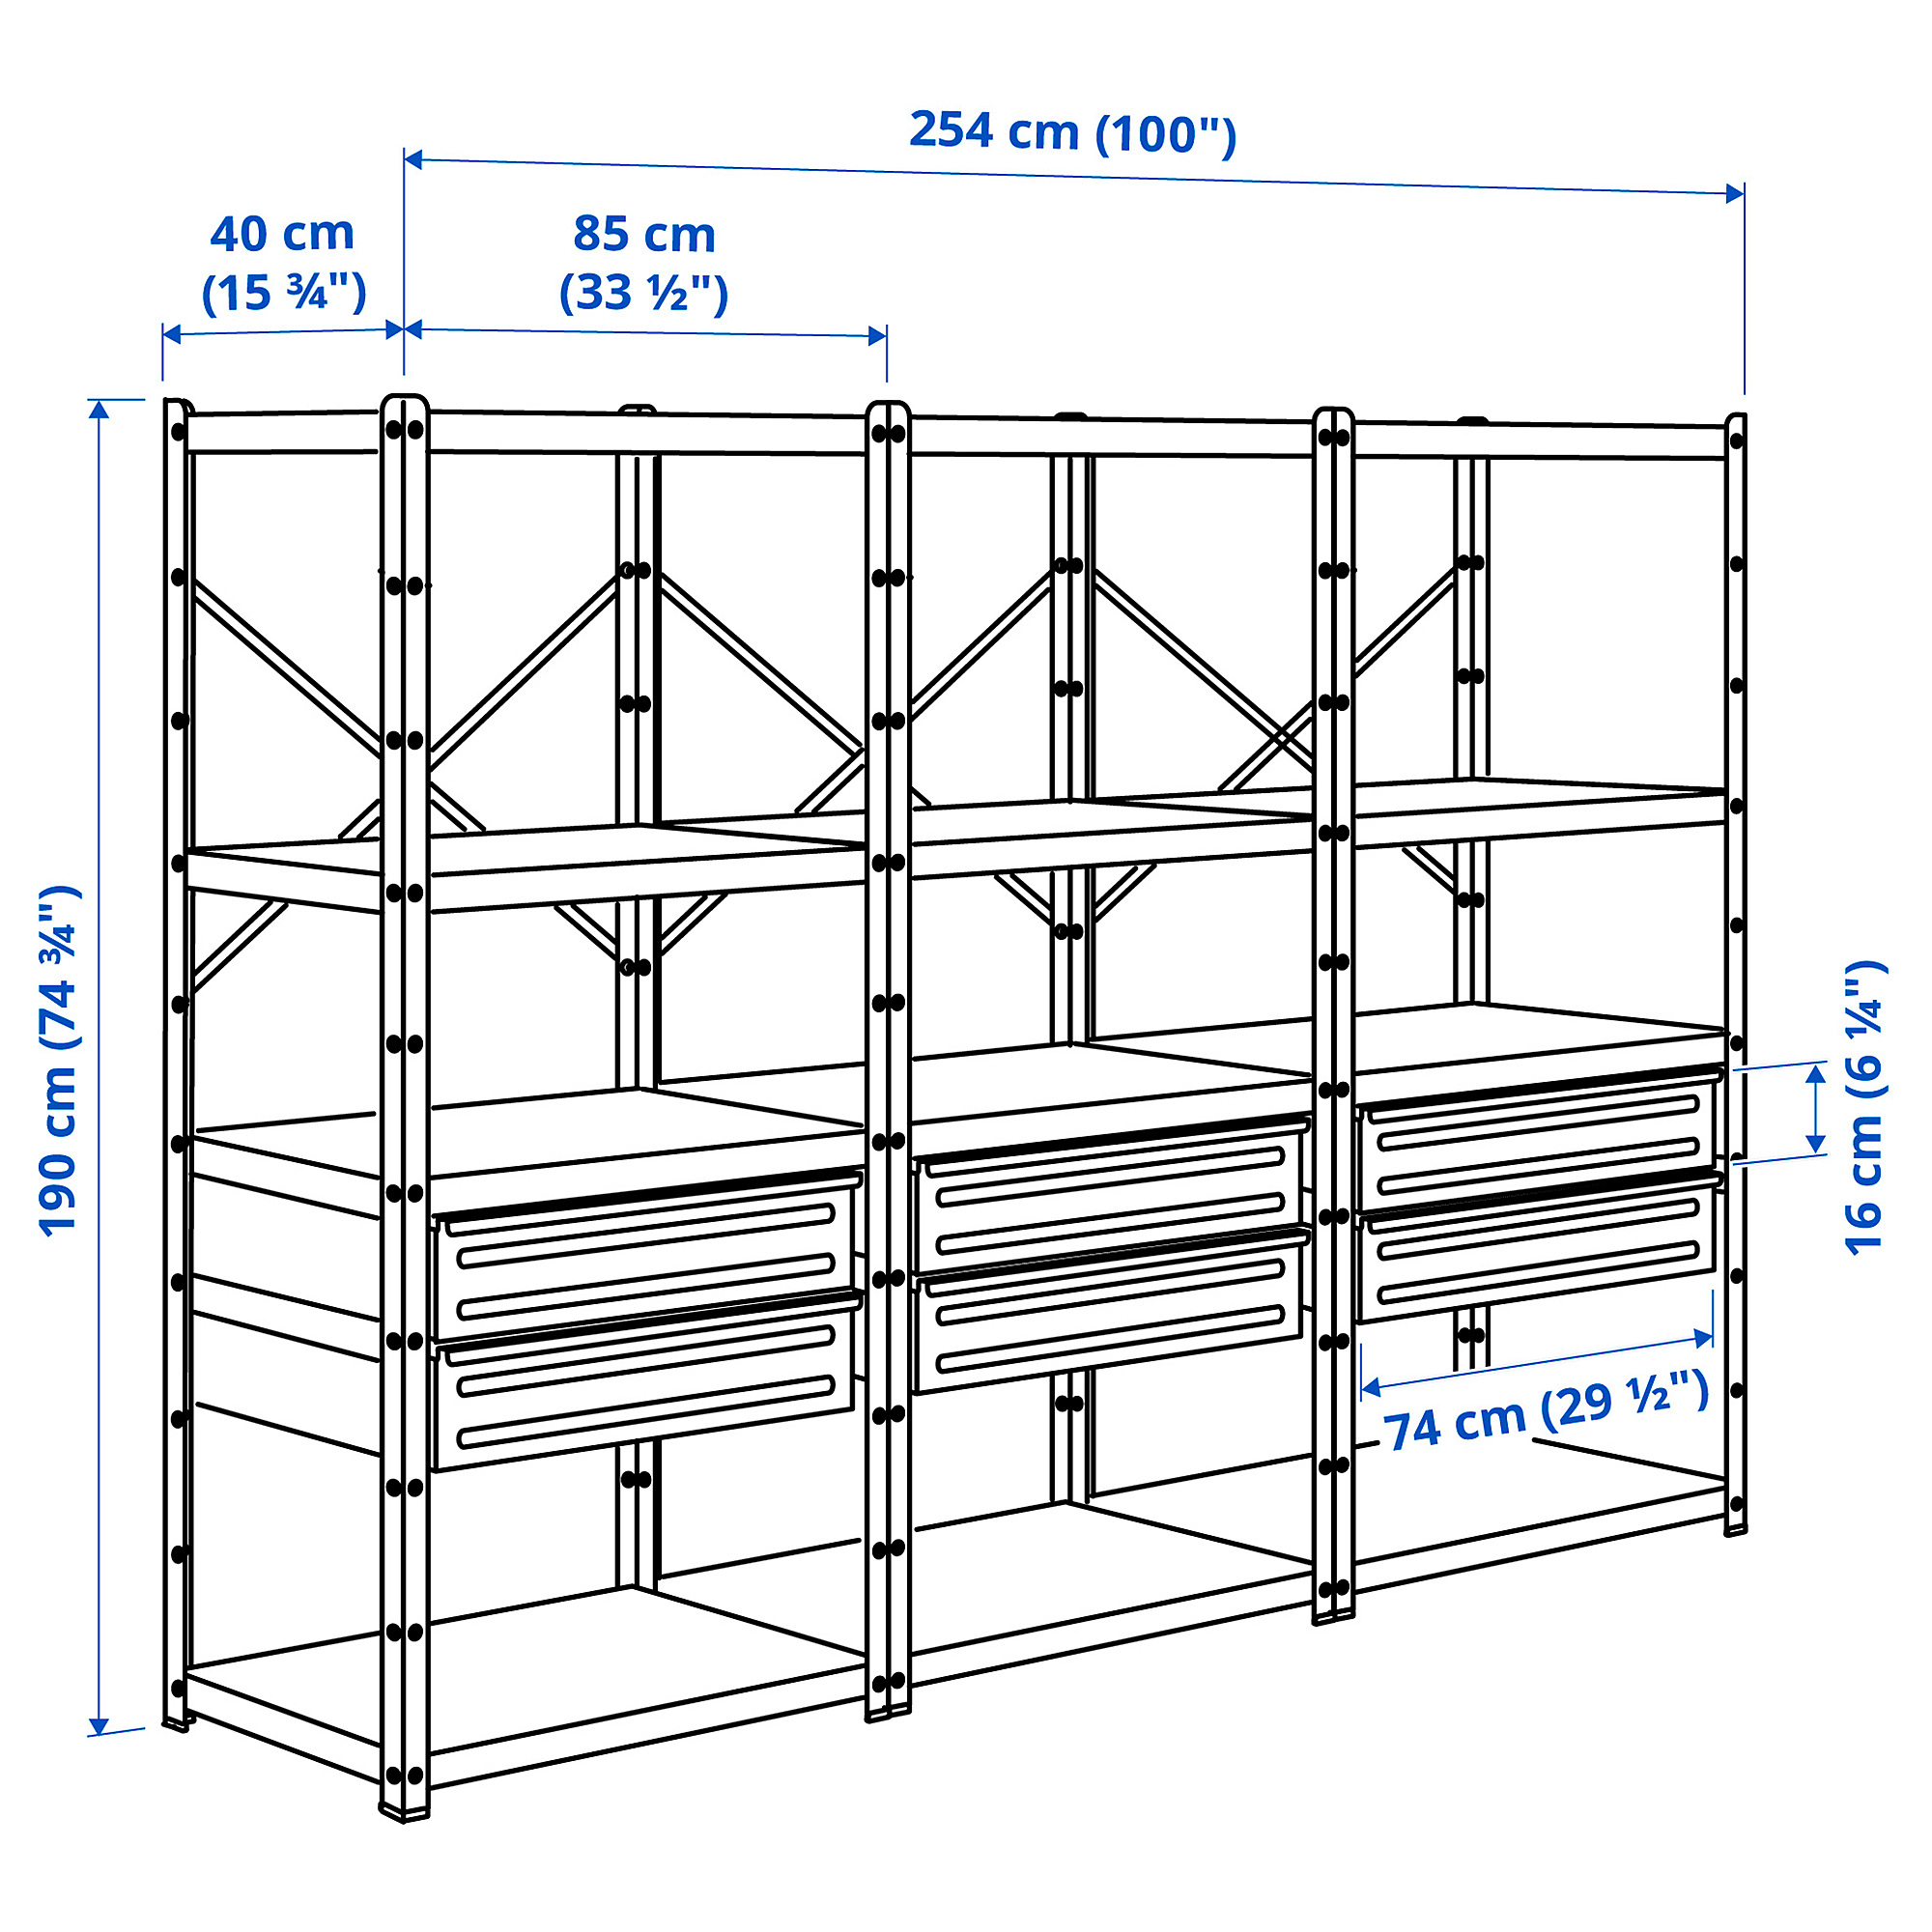 BROR shelving unit with drawers/shelves